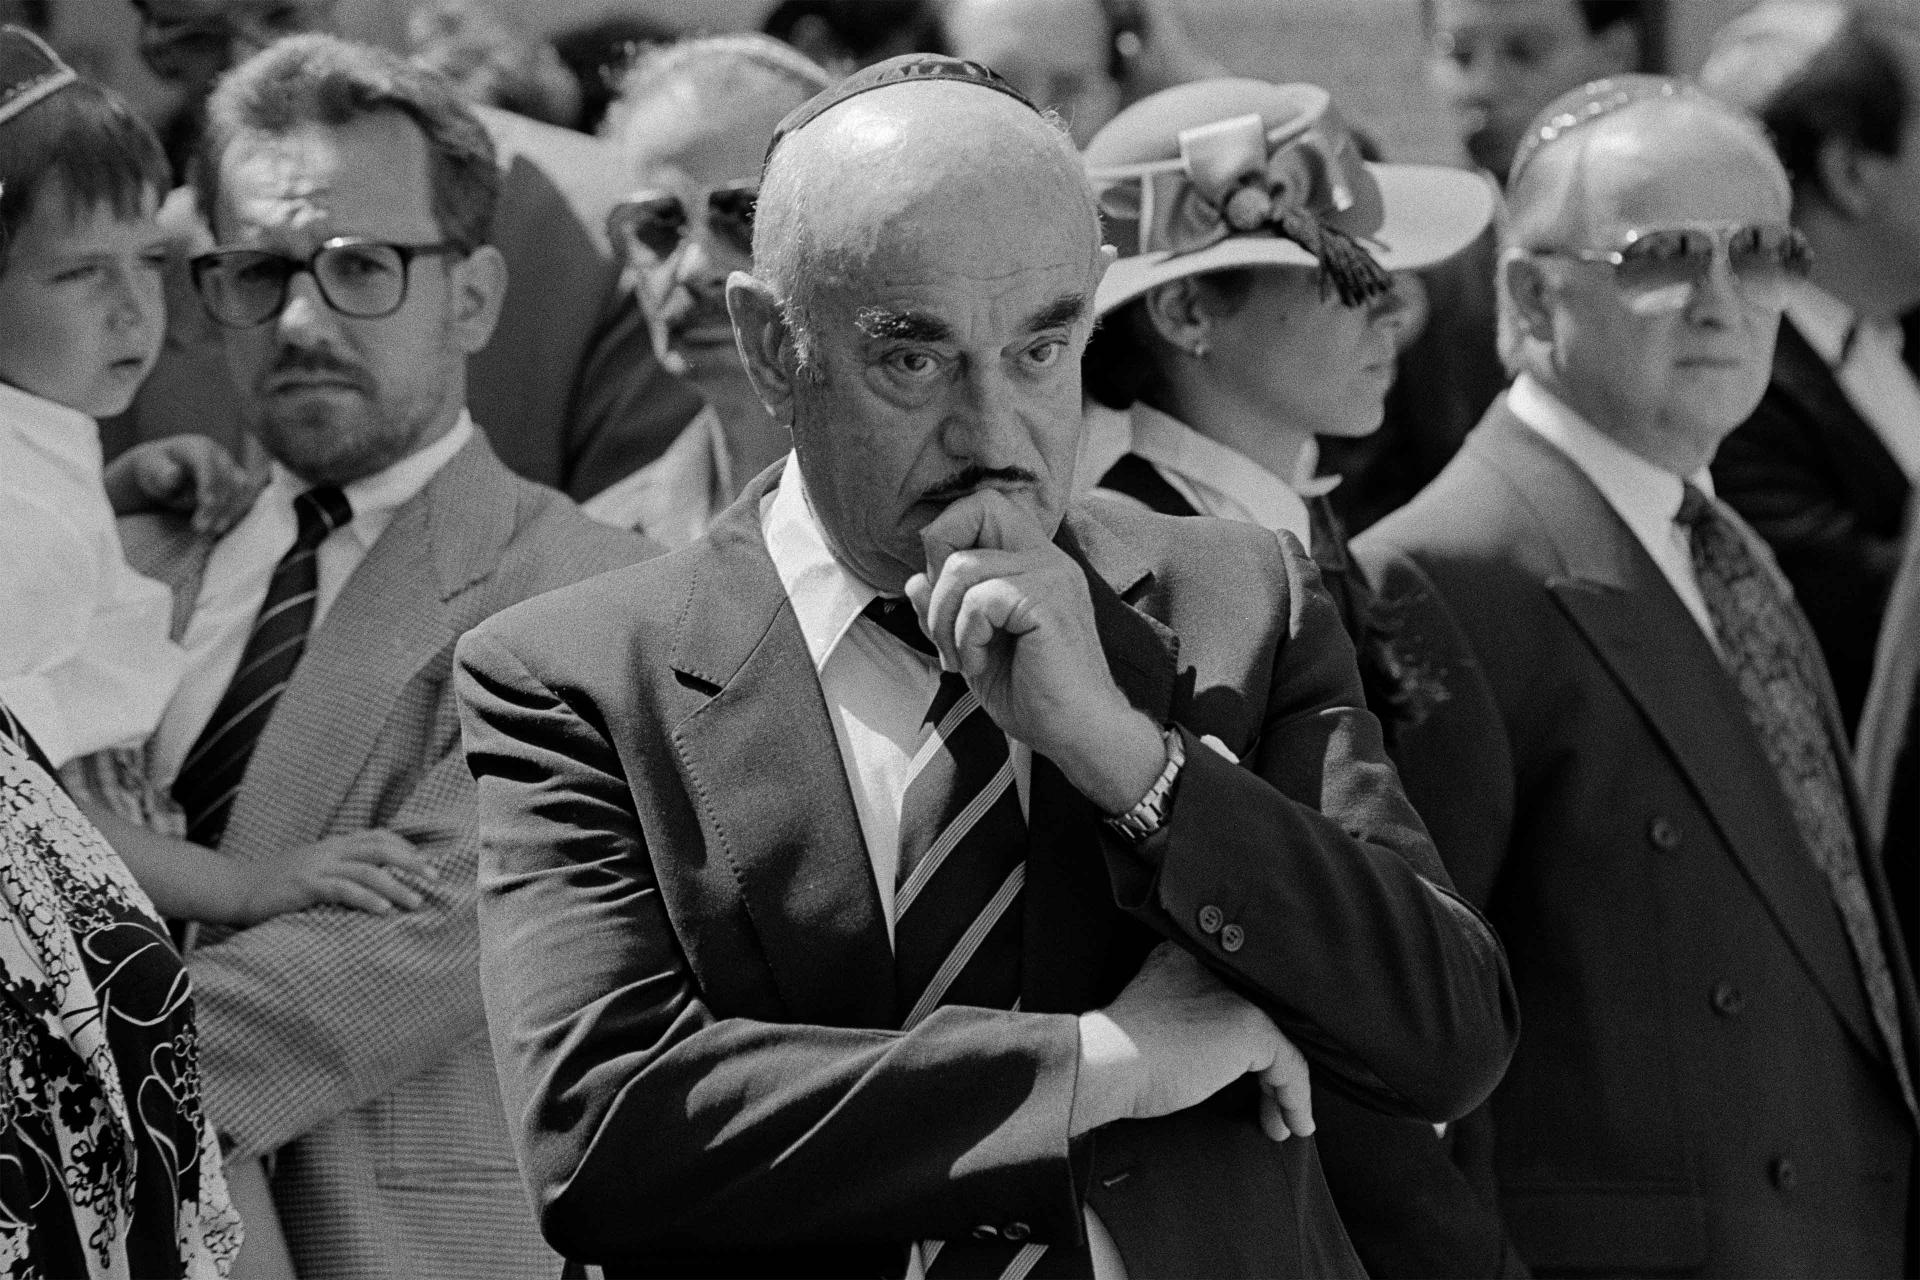 Black-and-white photograph: Artur Brauner stands among other mourners, holding his left hand to his chin and angling his right arm